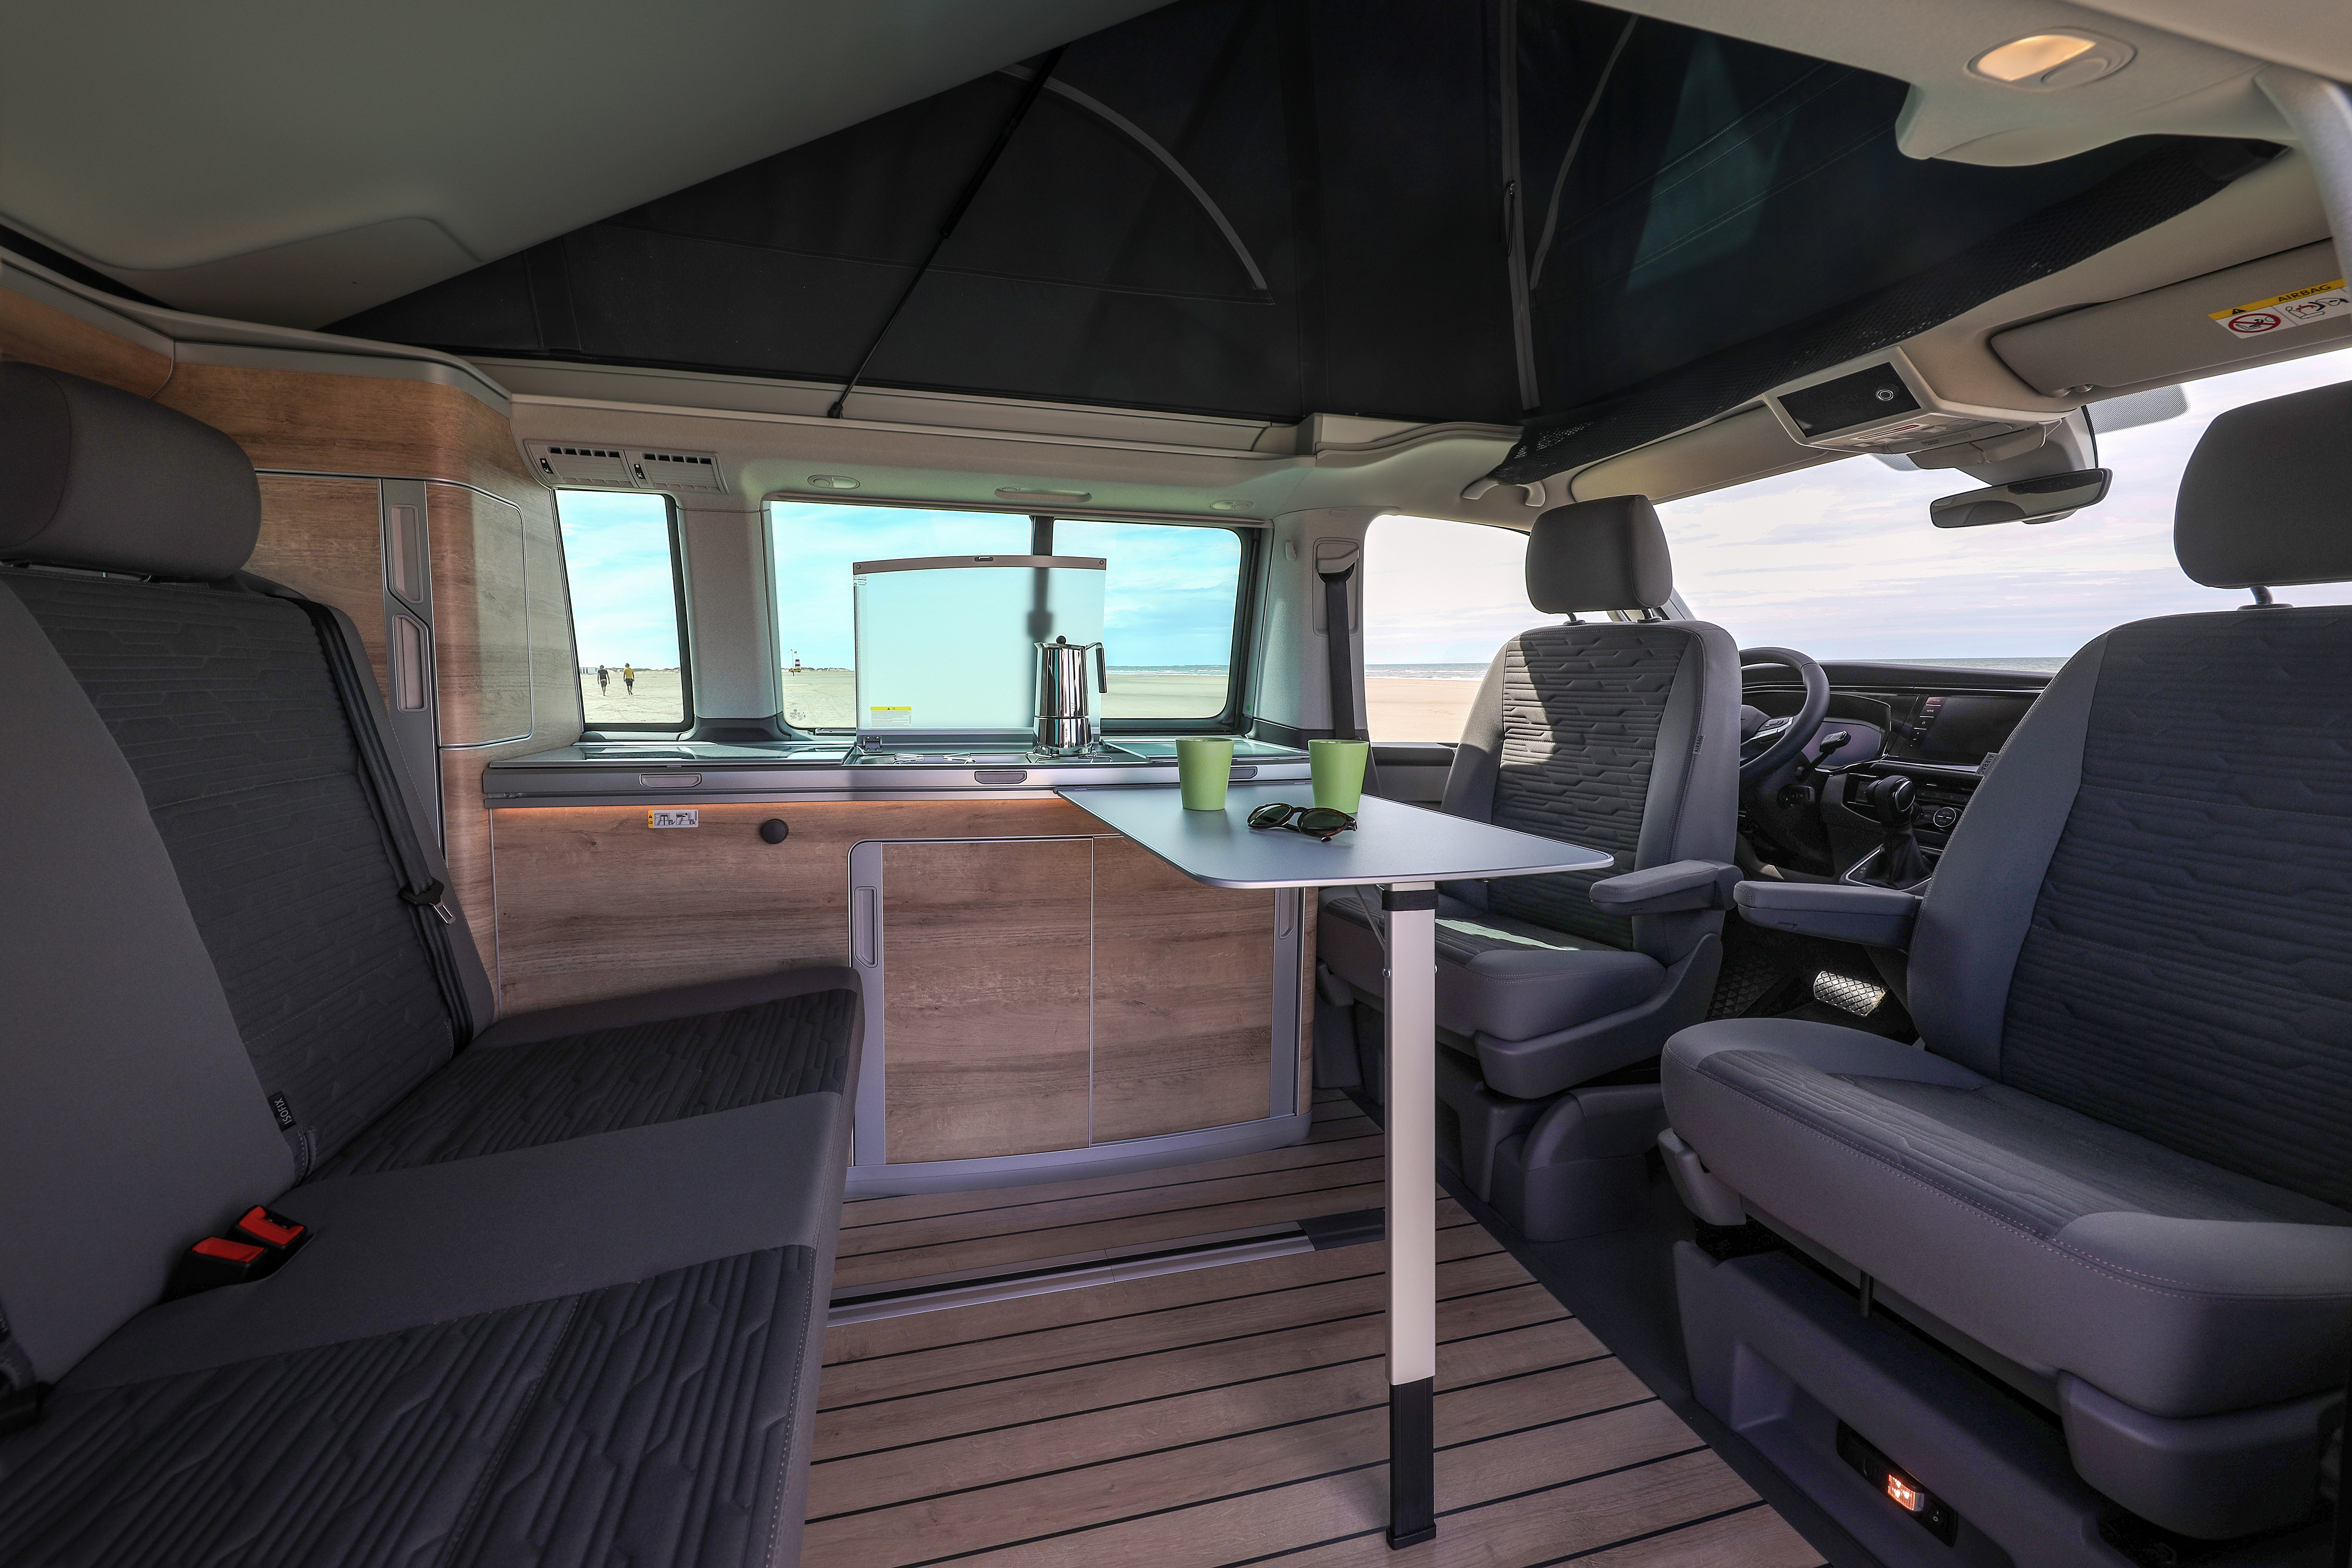 https://thevwcalifornia.com/wp-content/uploads/2019/08/Update_of_an_icon_New_California_6.1_with_digital_control_of_the_camper_functions-22651.jpg